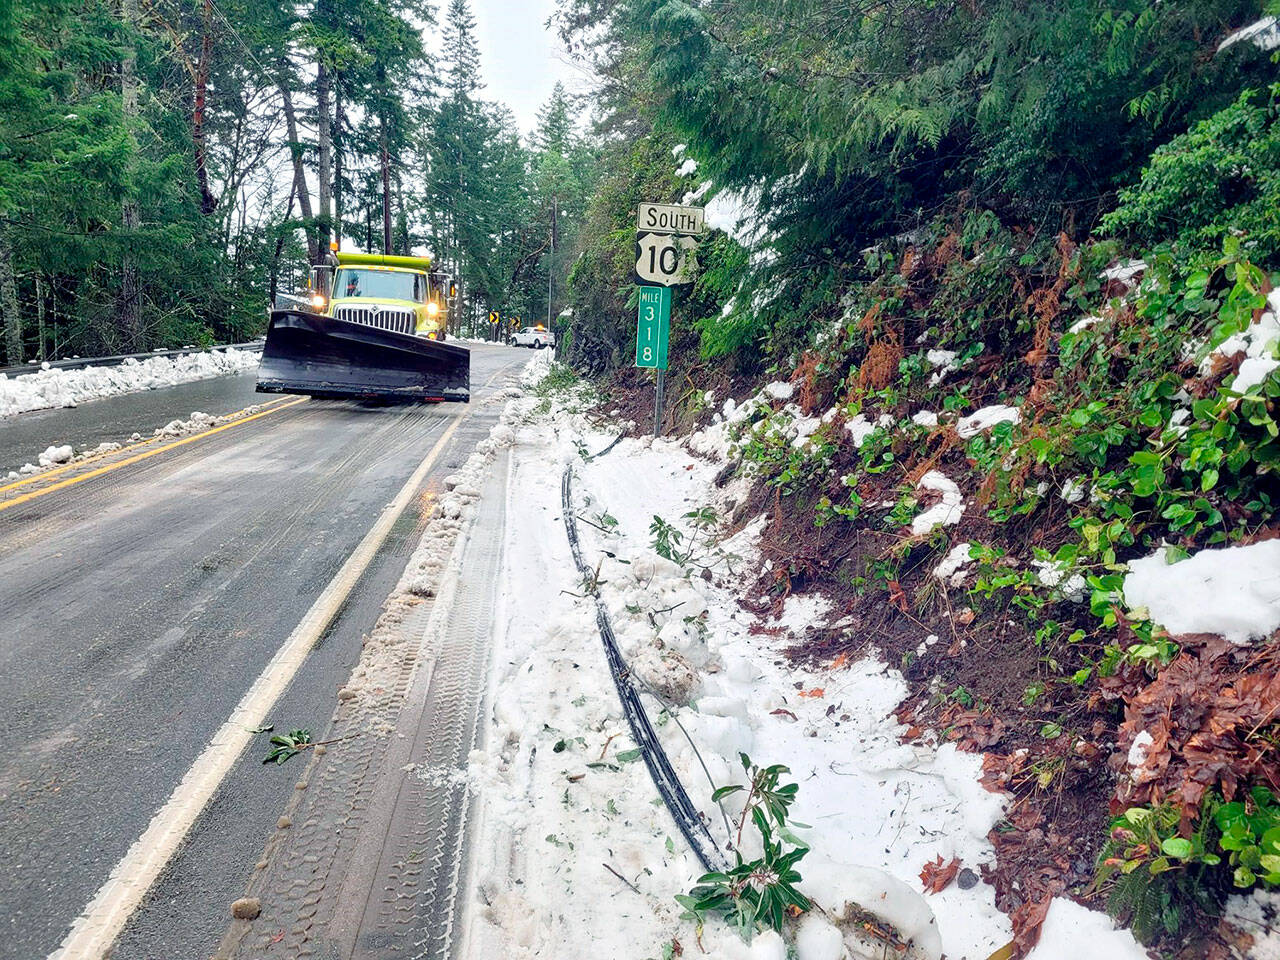 Here are some new photos of crews final clearing efforts to reopen US 101 to all traffic today.